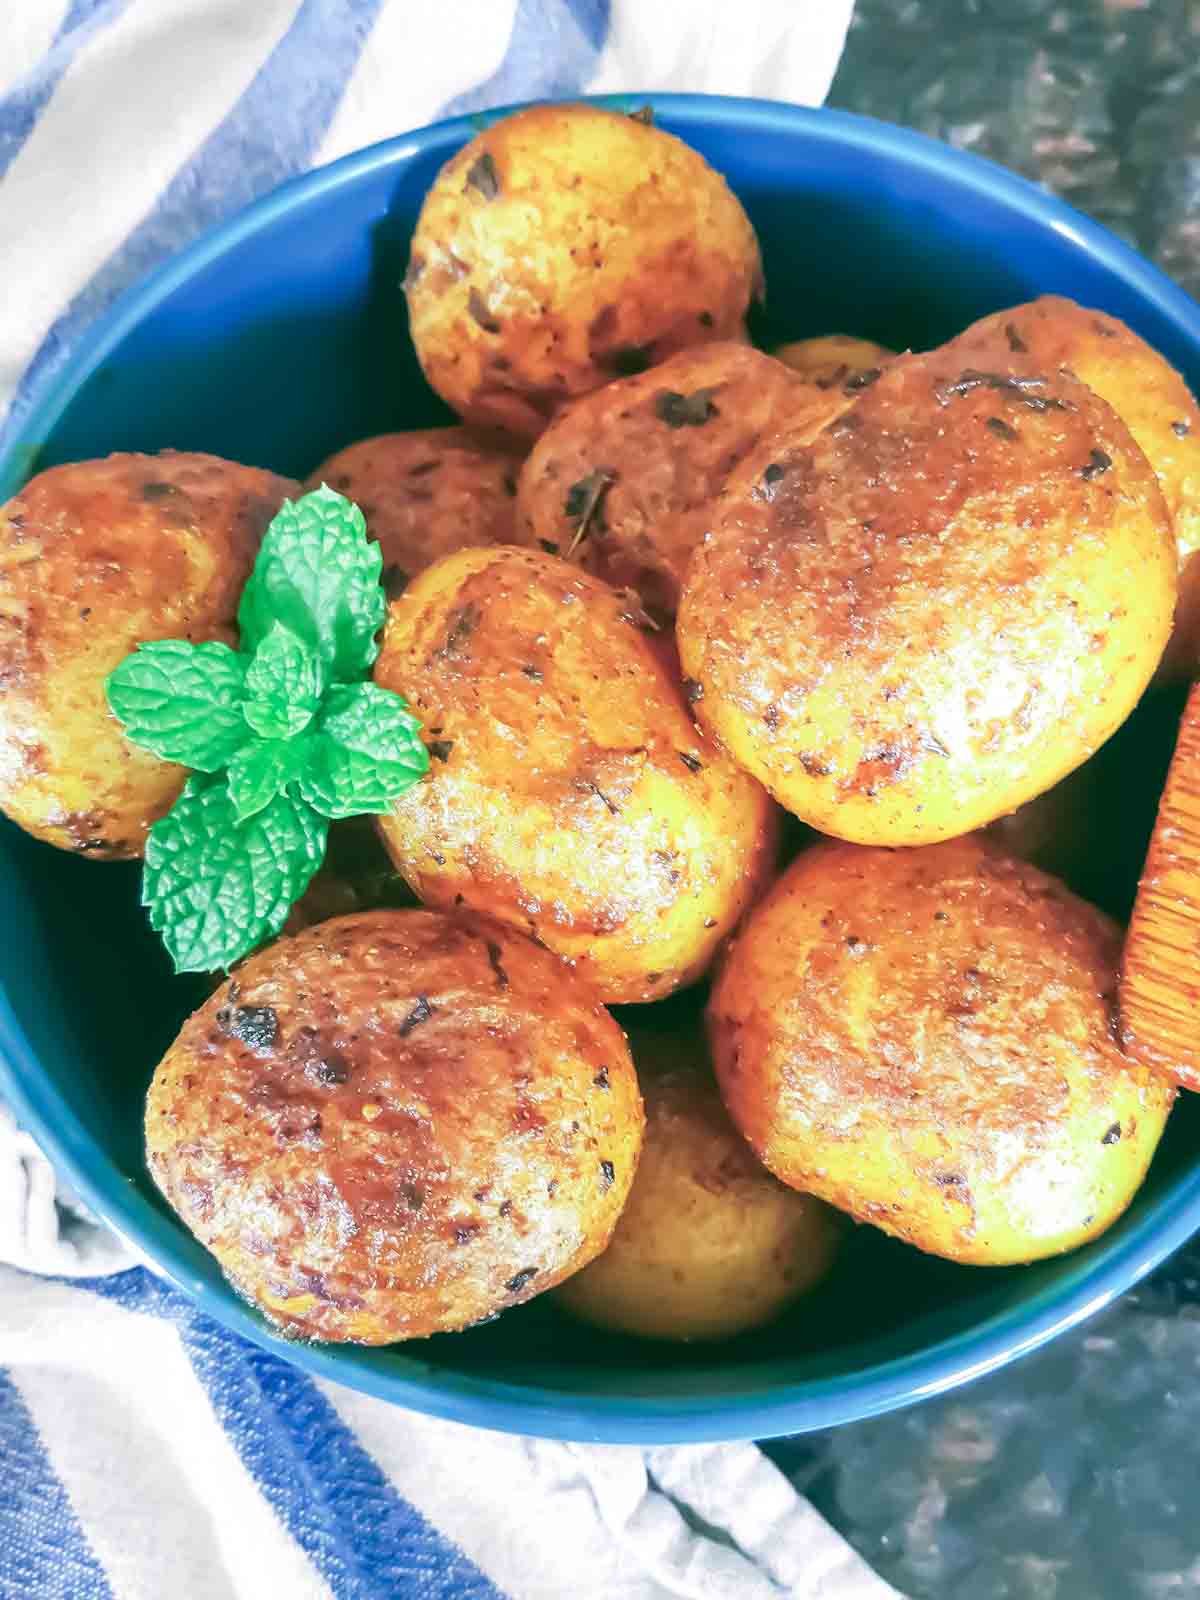 Bombay potatoes which are spicy Indian street food from Mumbai Cuisine served in a bowl.